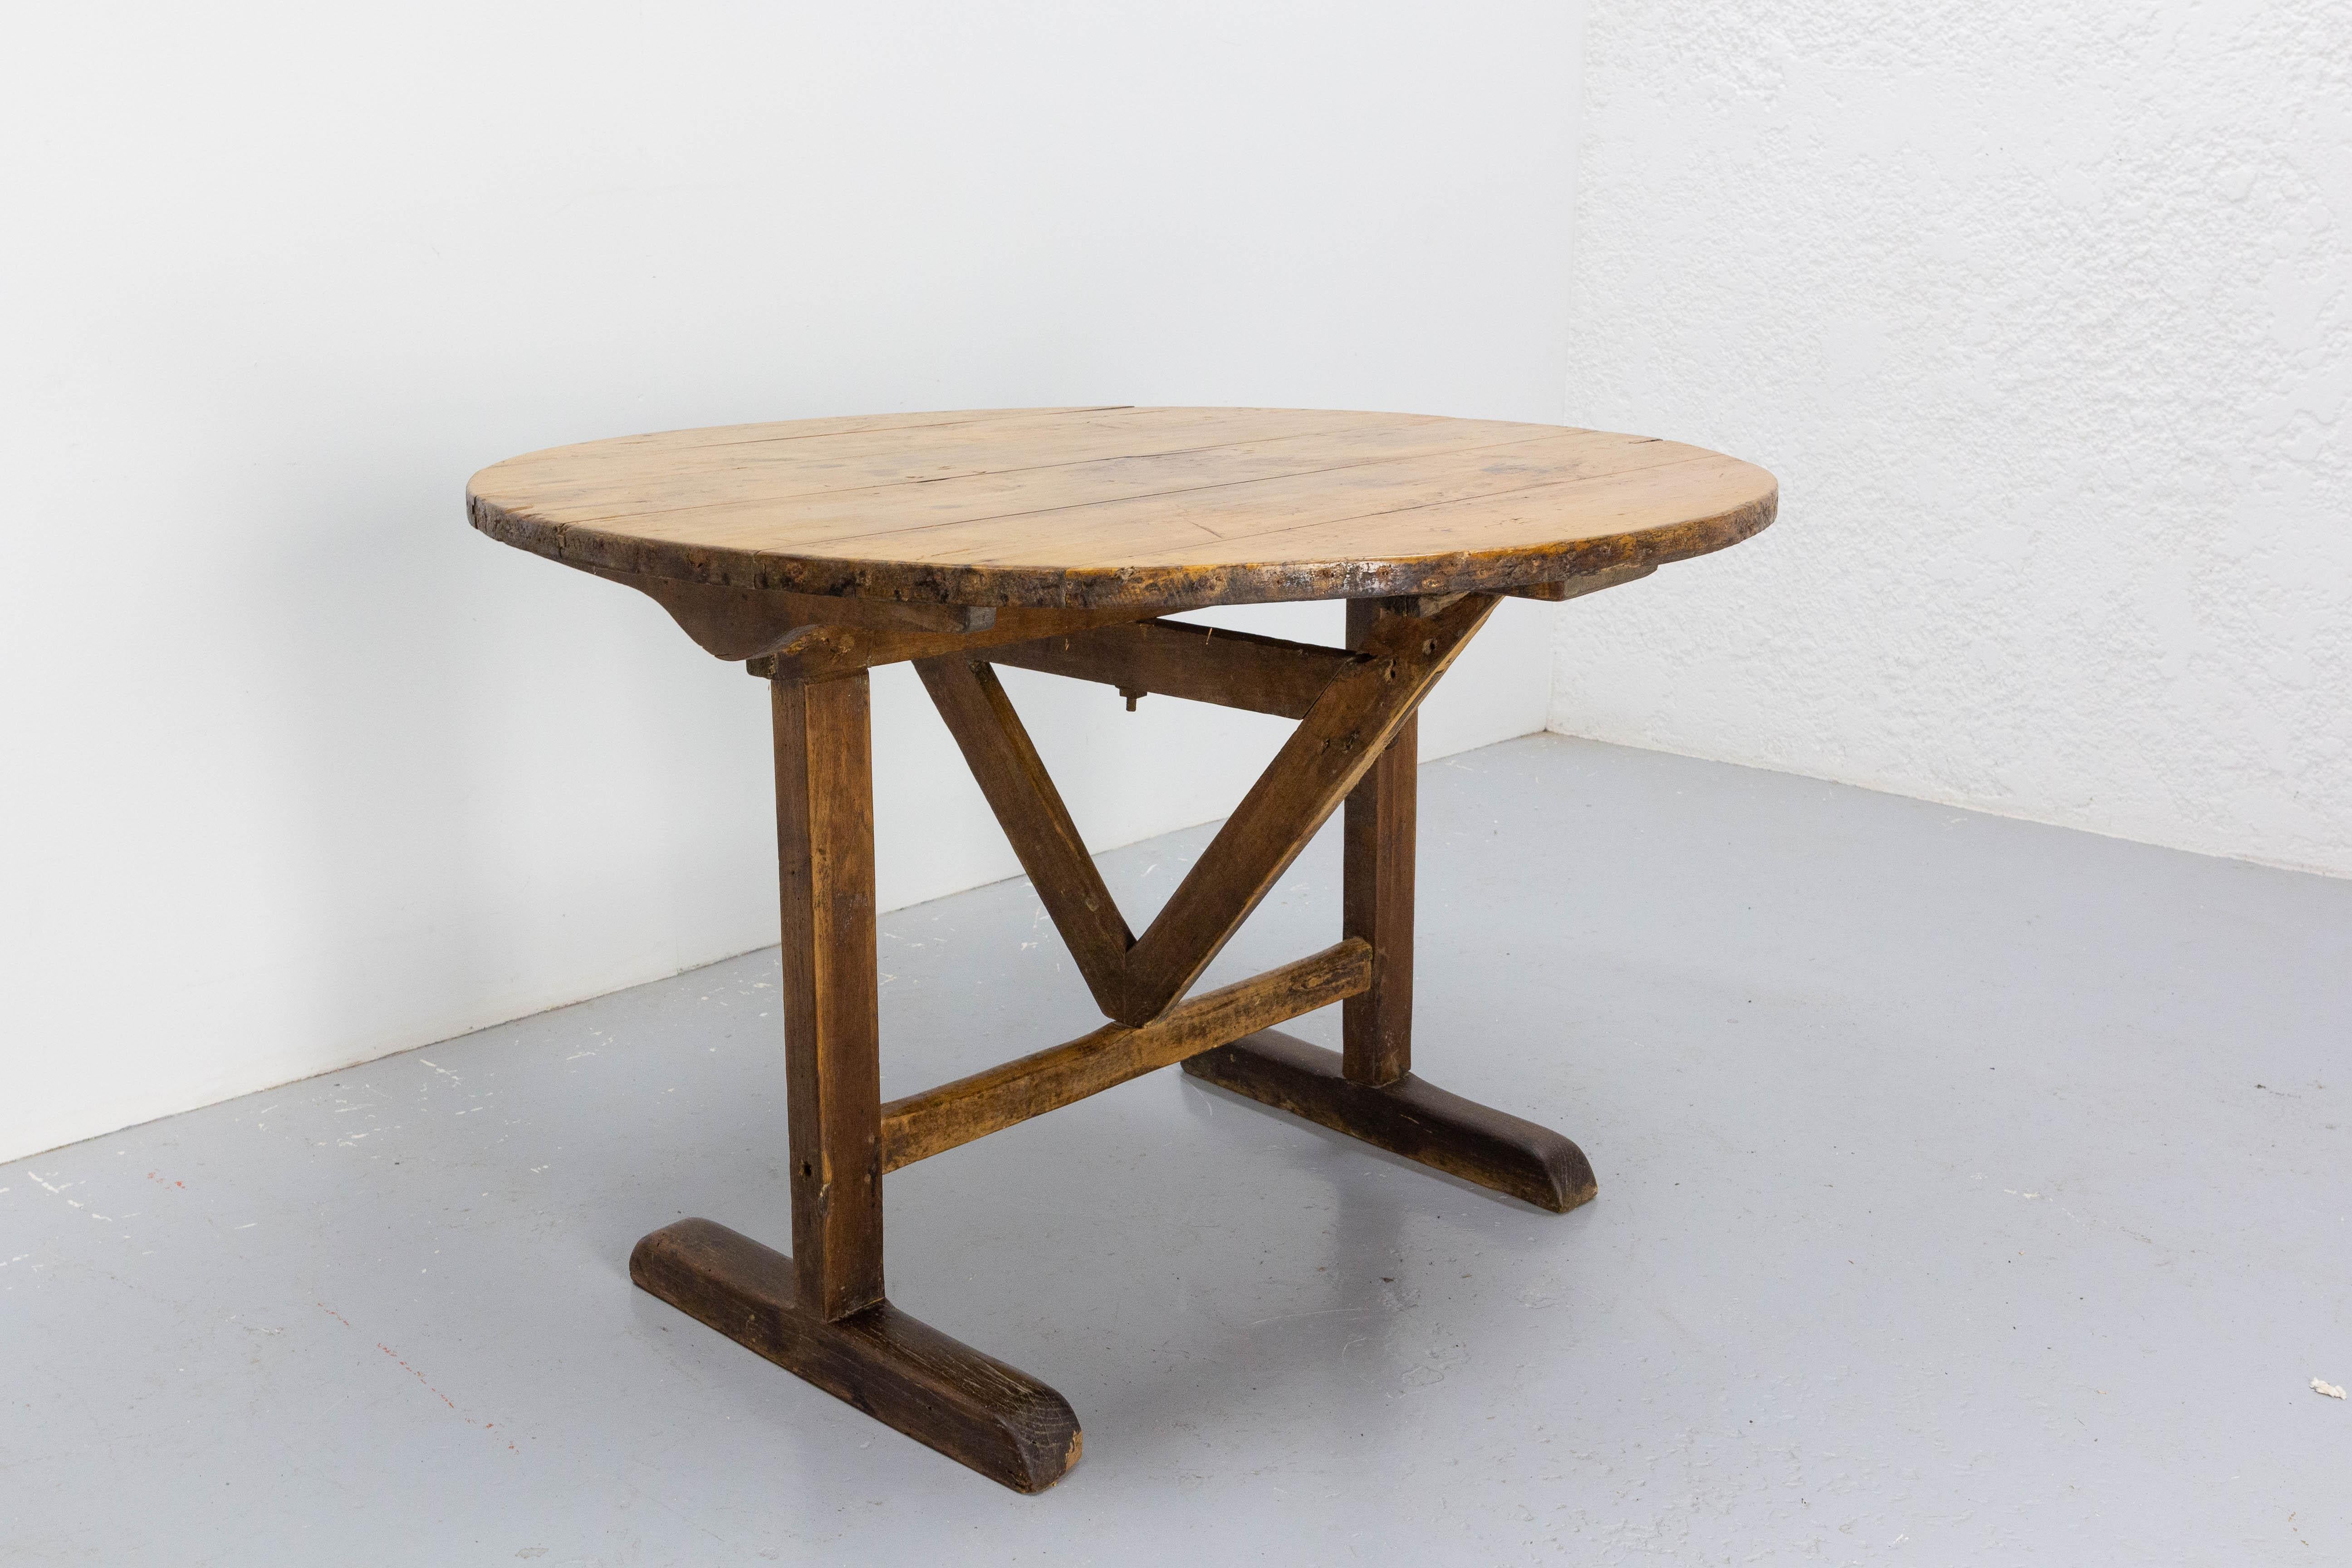 French Foldable Oak & Poplar Table Called Winemaker's Table, 19th Century For Sale 2